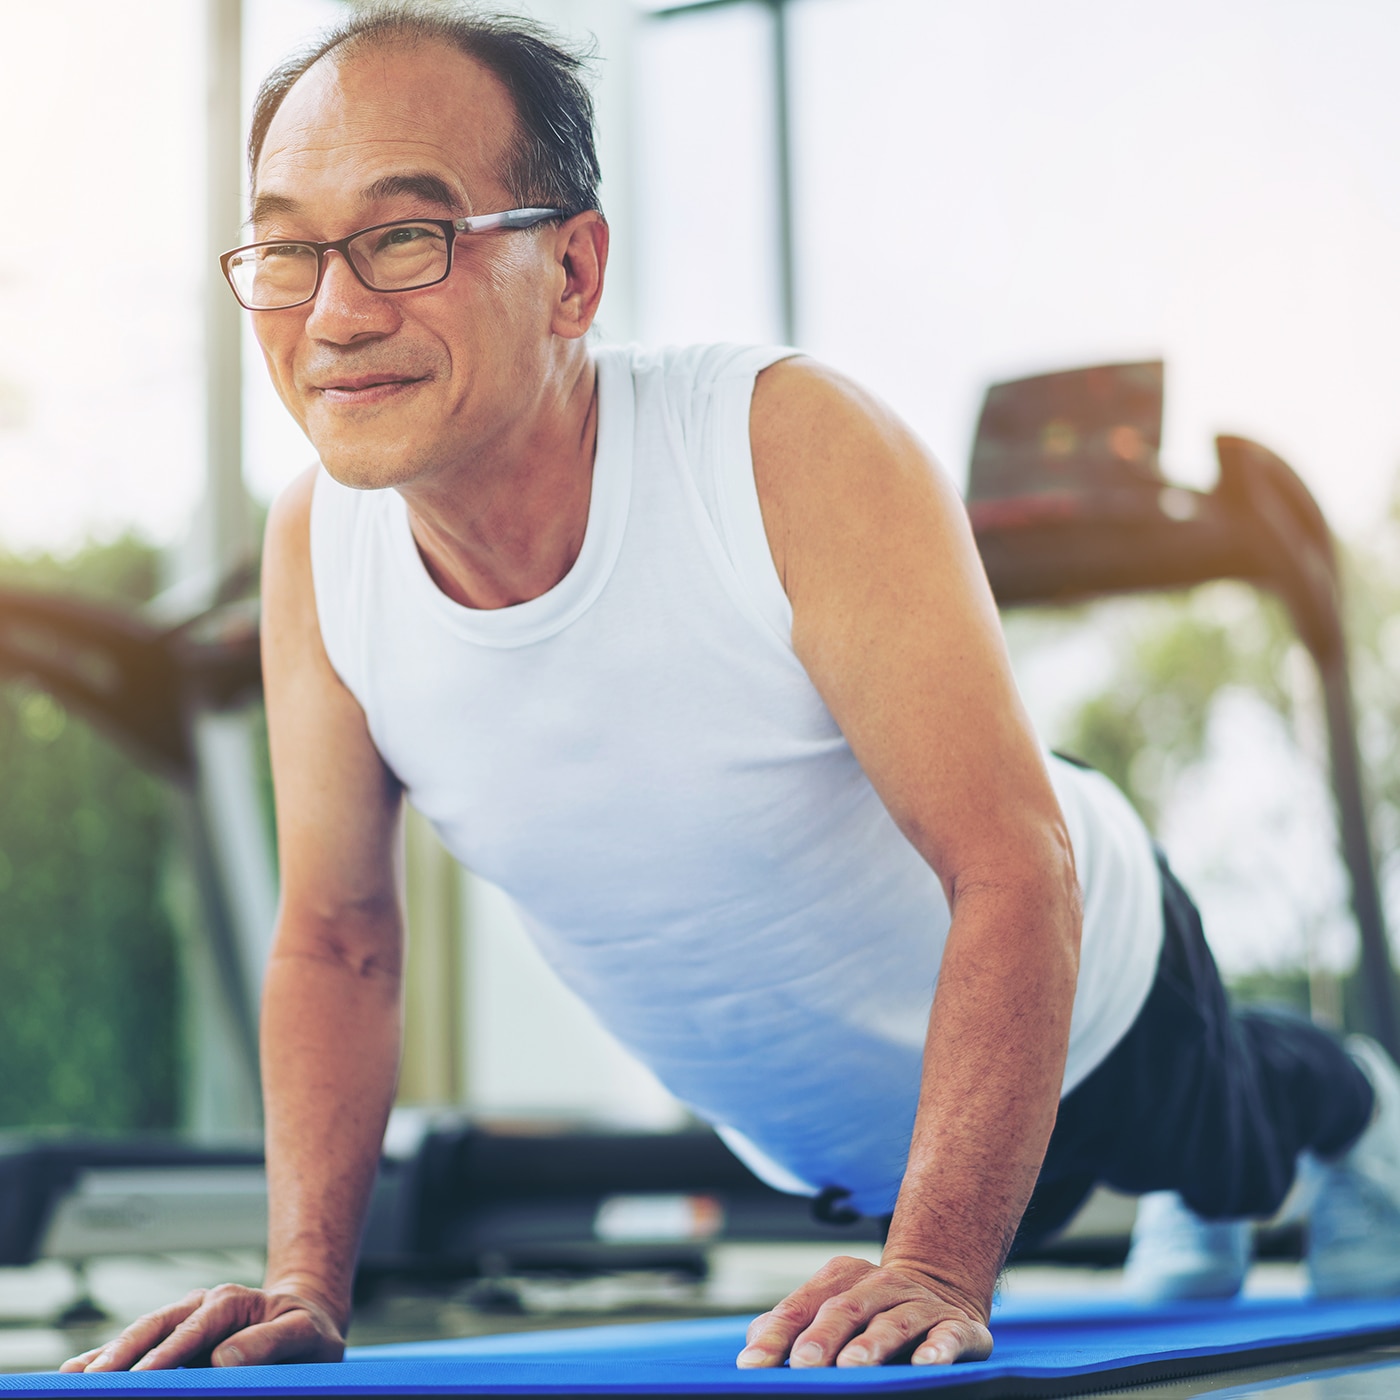 Building Strength Before Joint Replacement Surgery